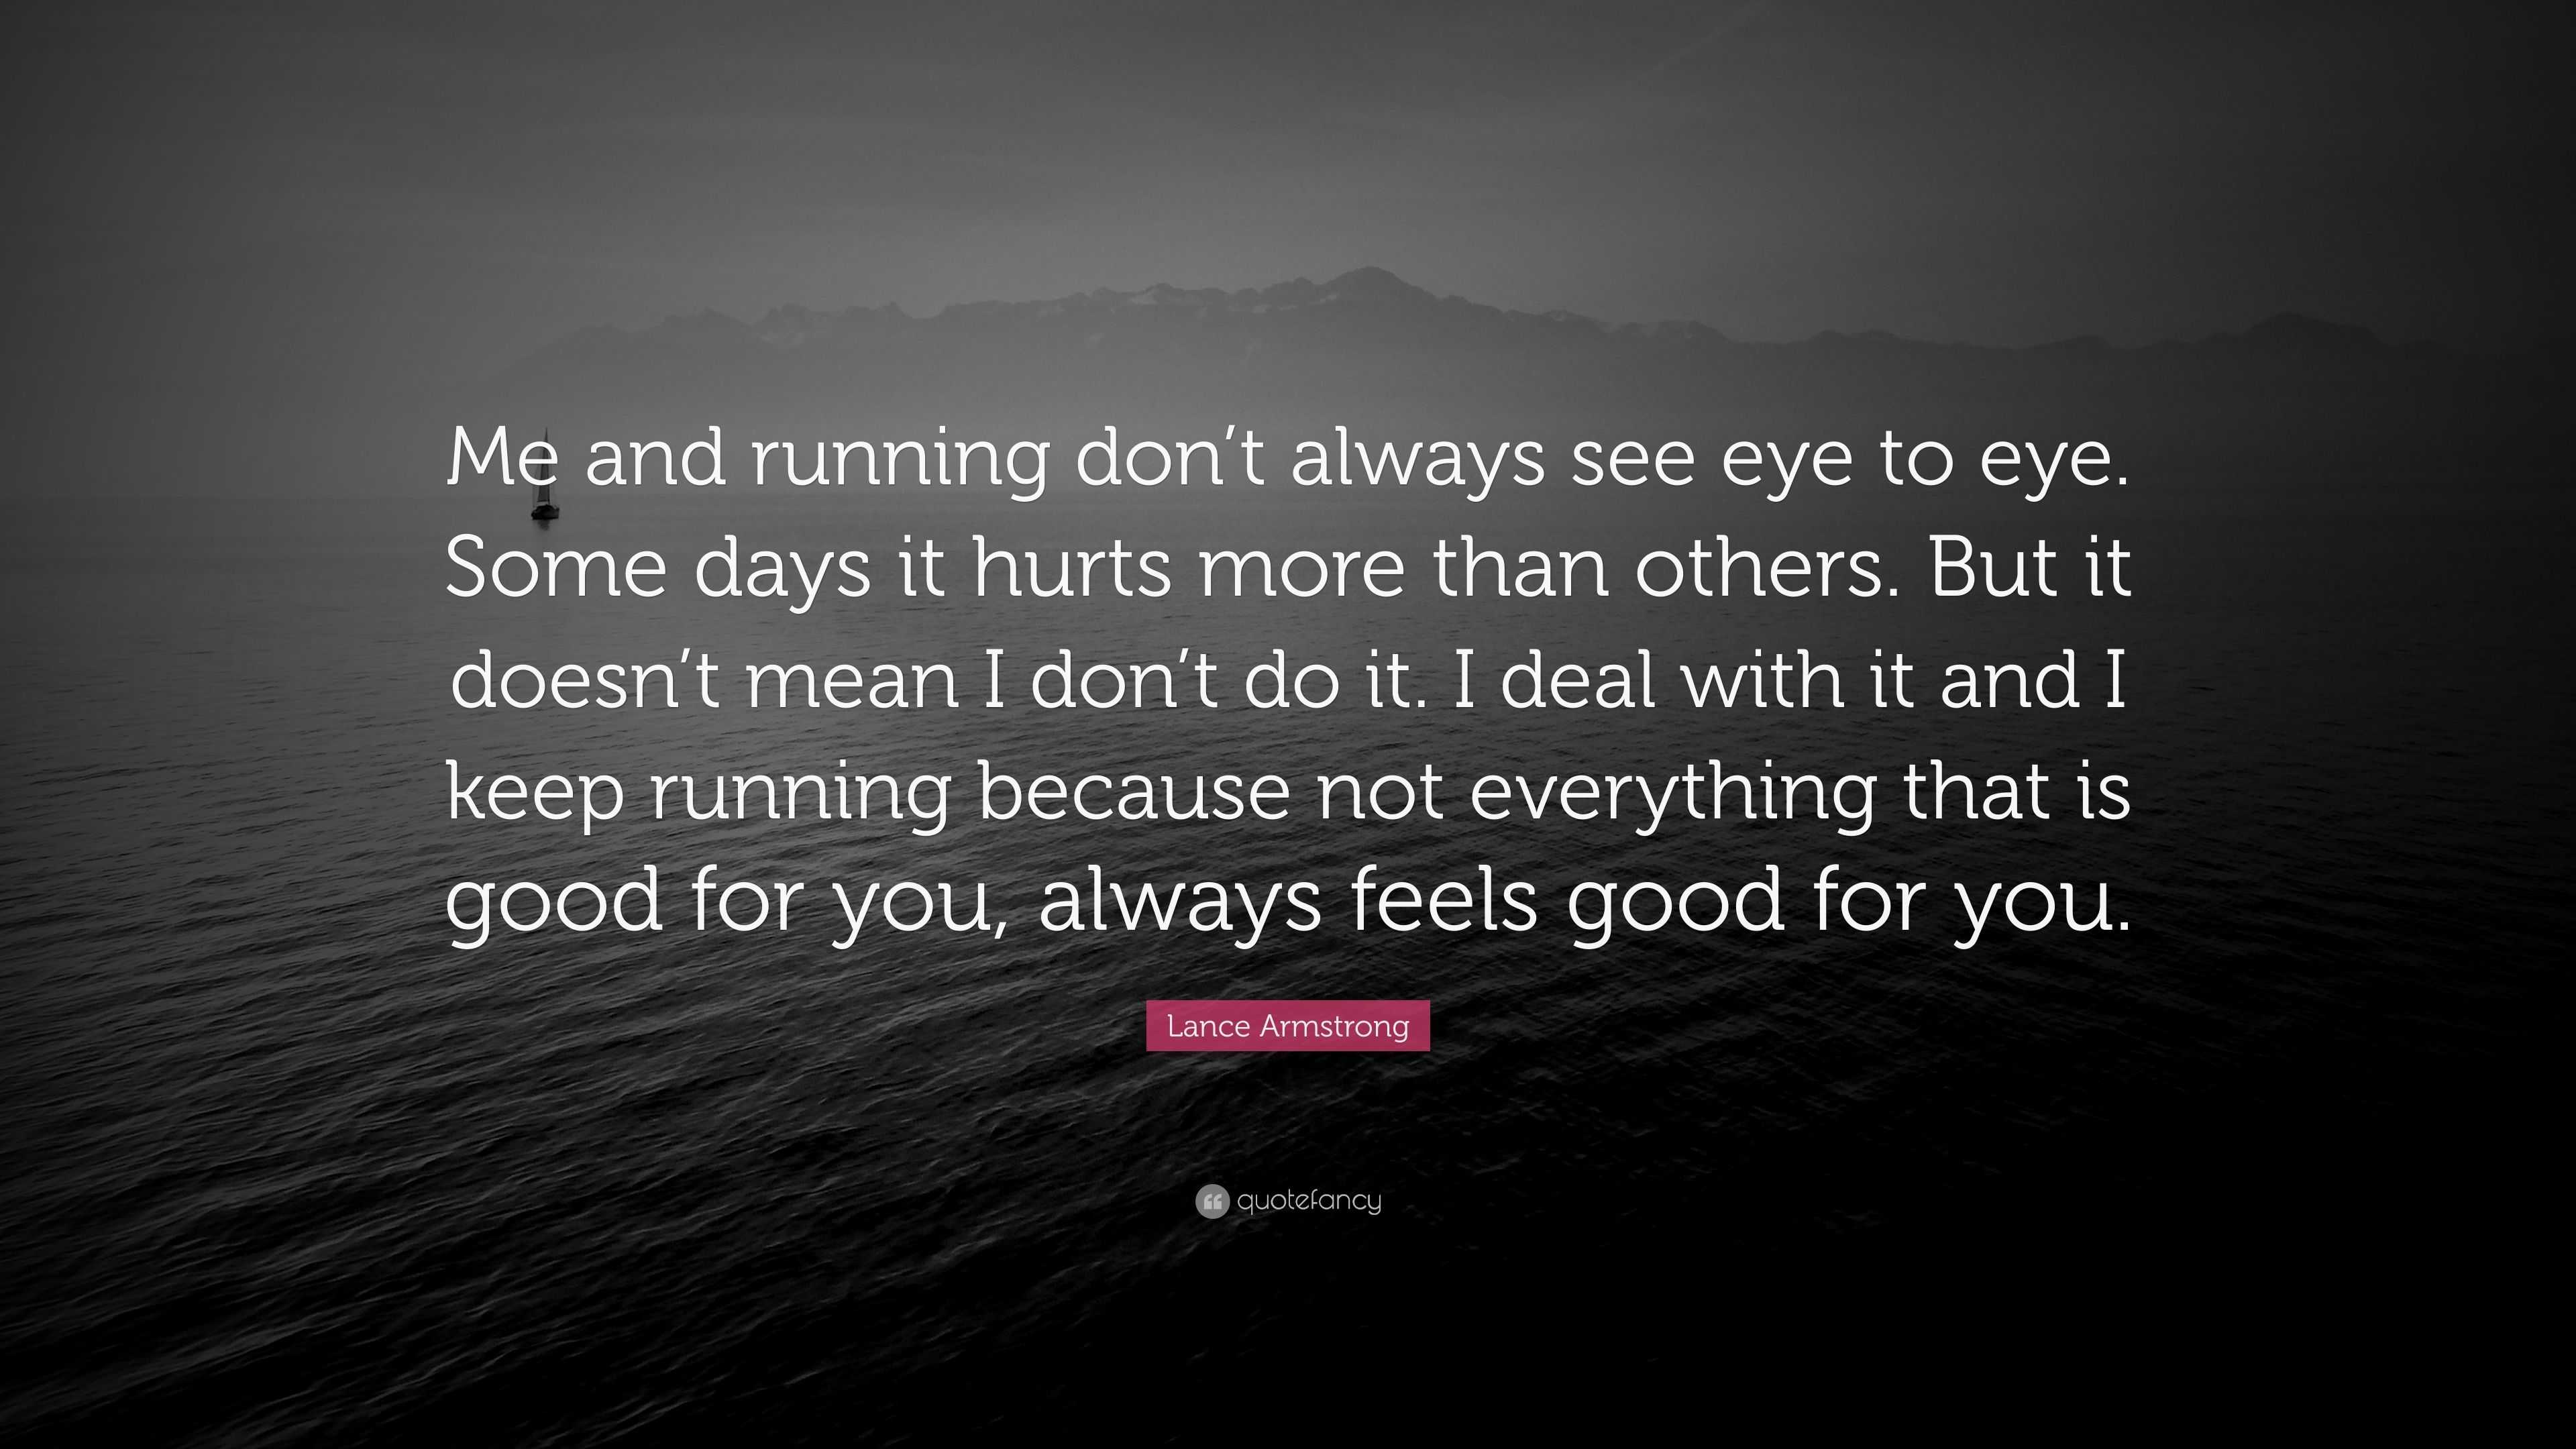 Lance Armstrong Quote: “Me and running don’t always see eye to eye ...